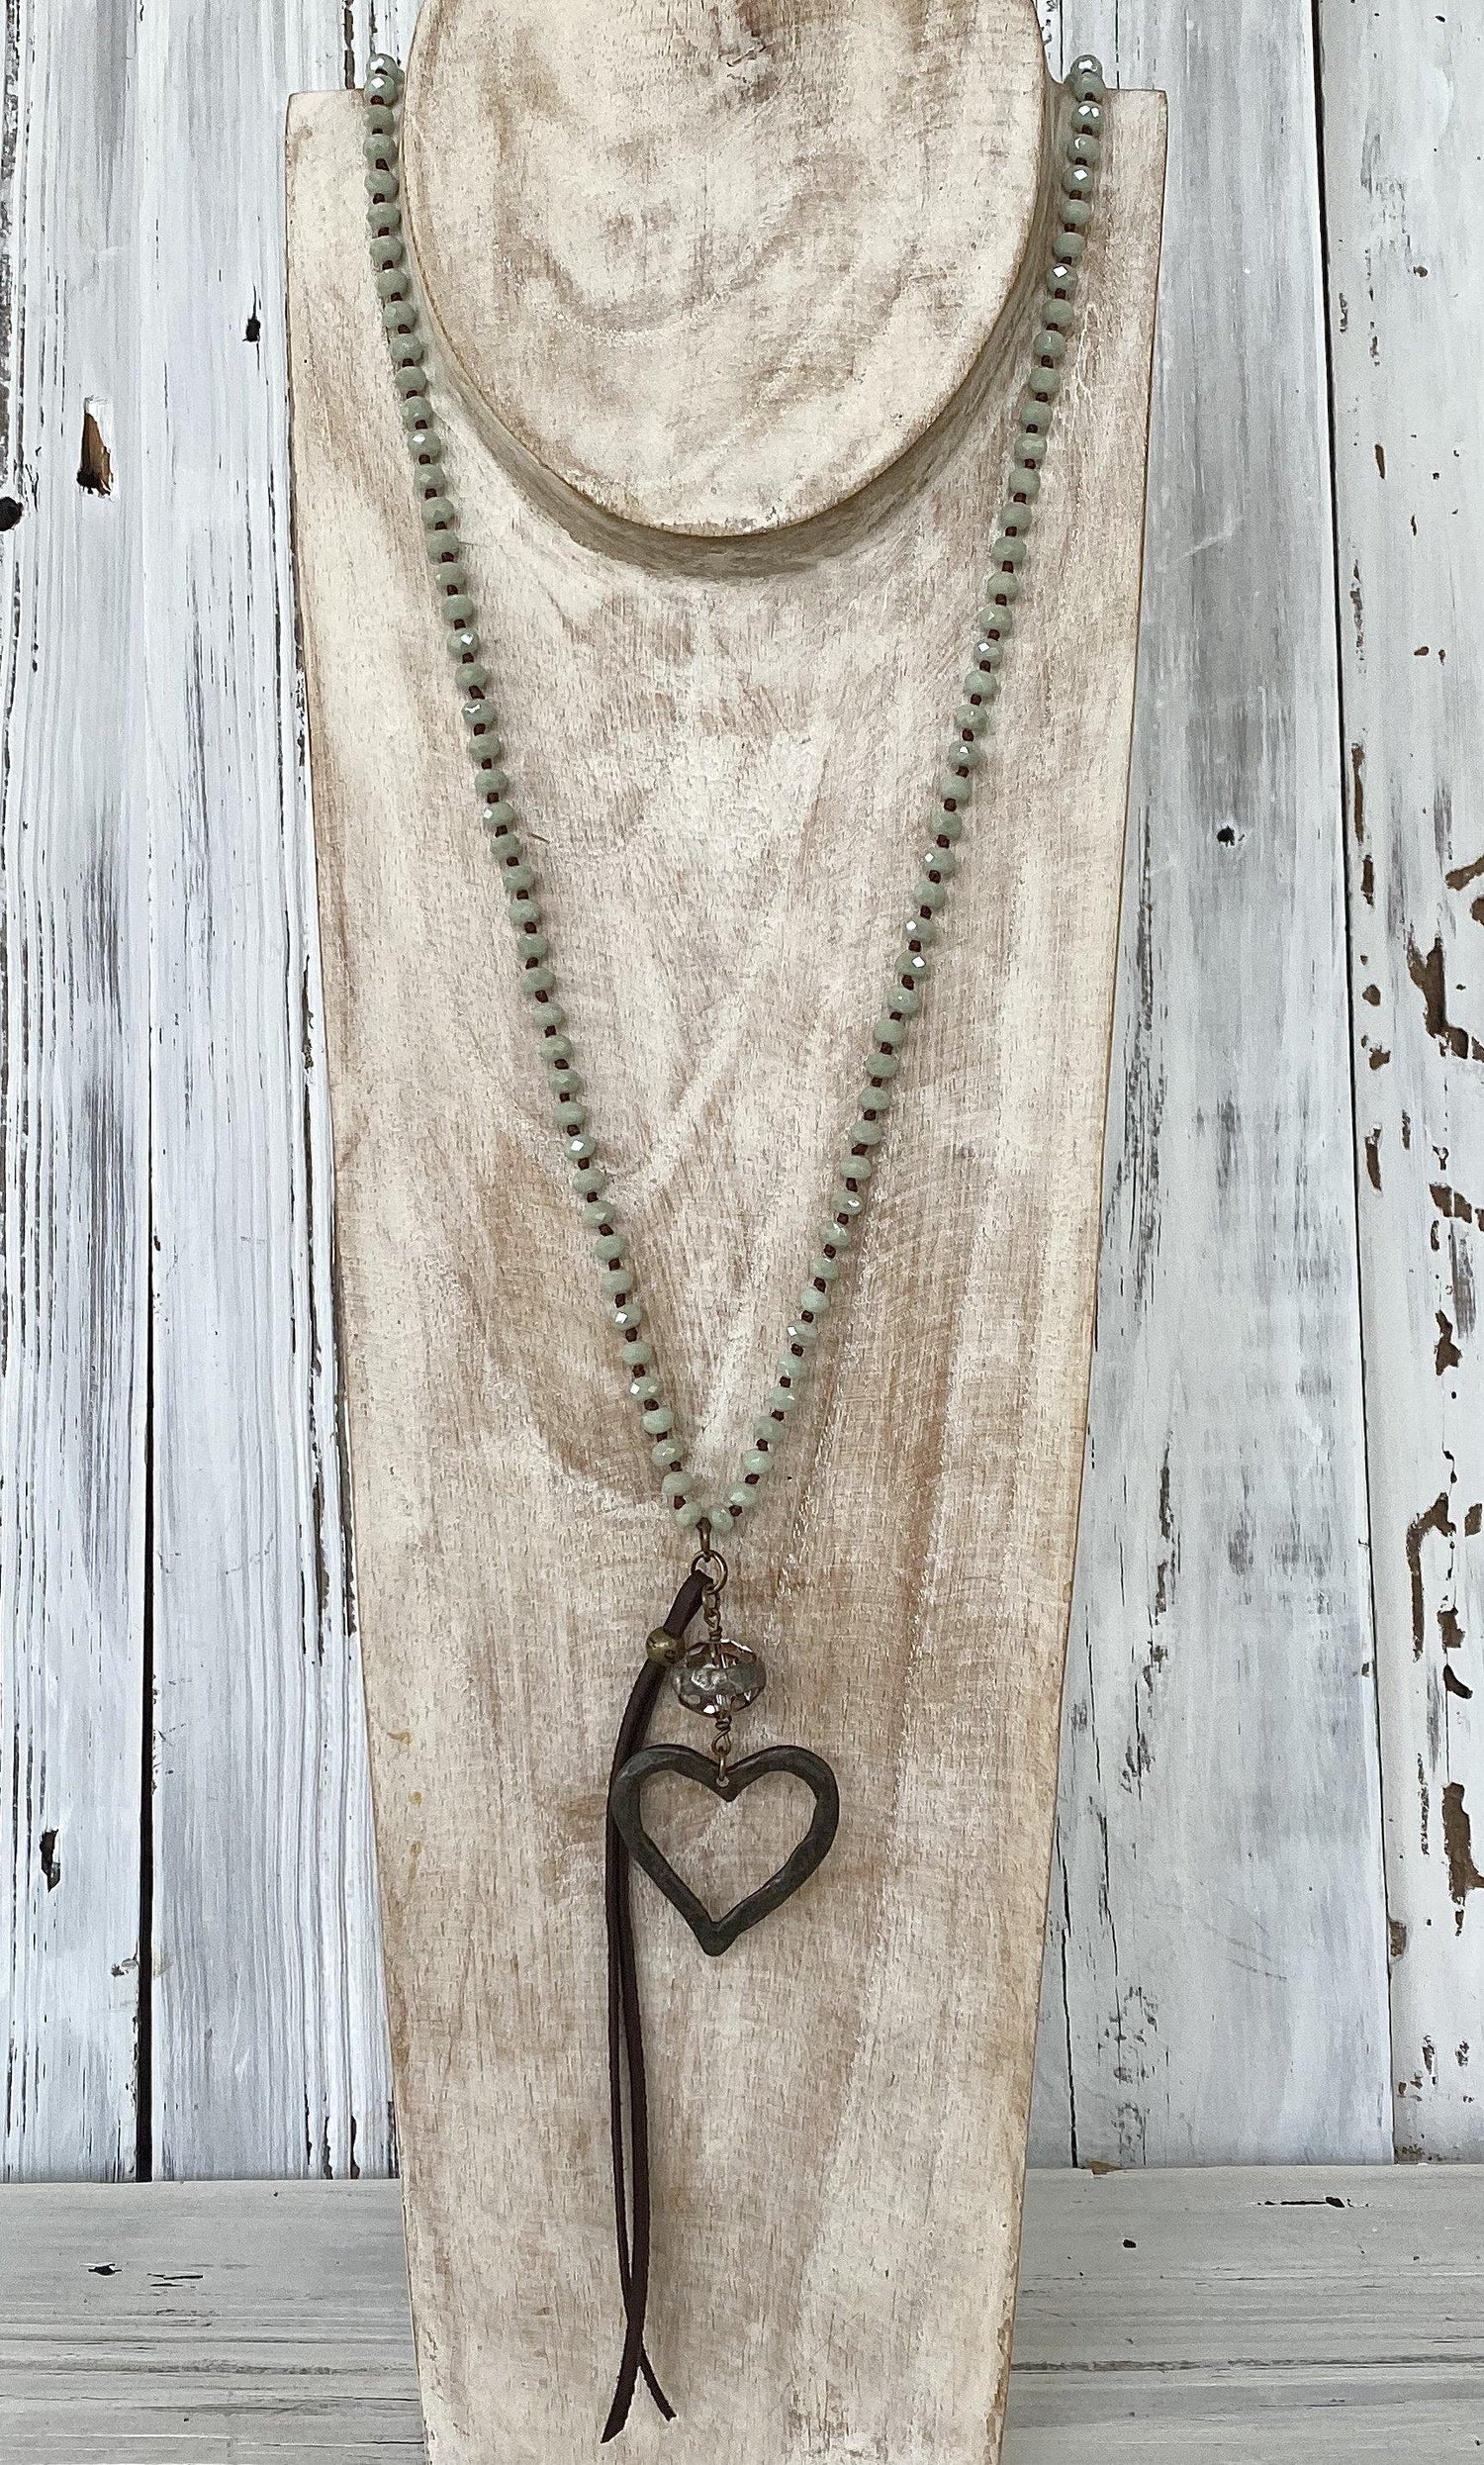 Heart Pendant Necklace - By Sheila Fay